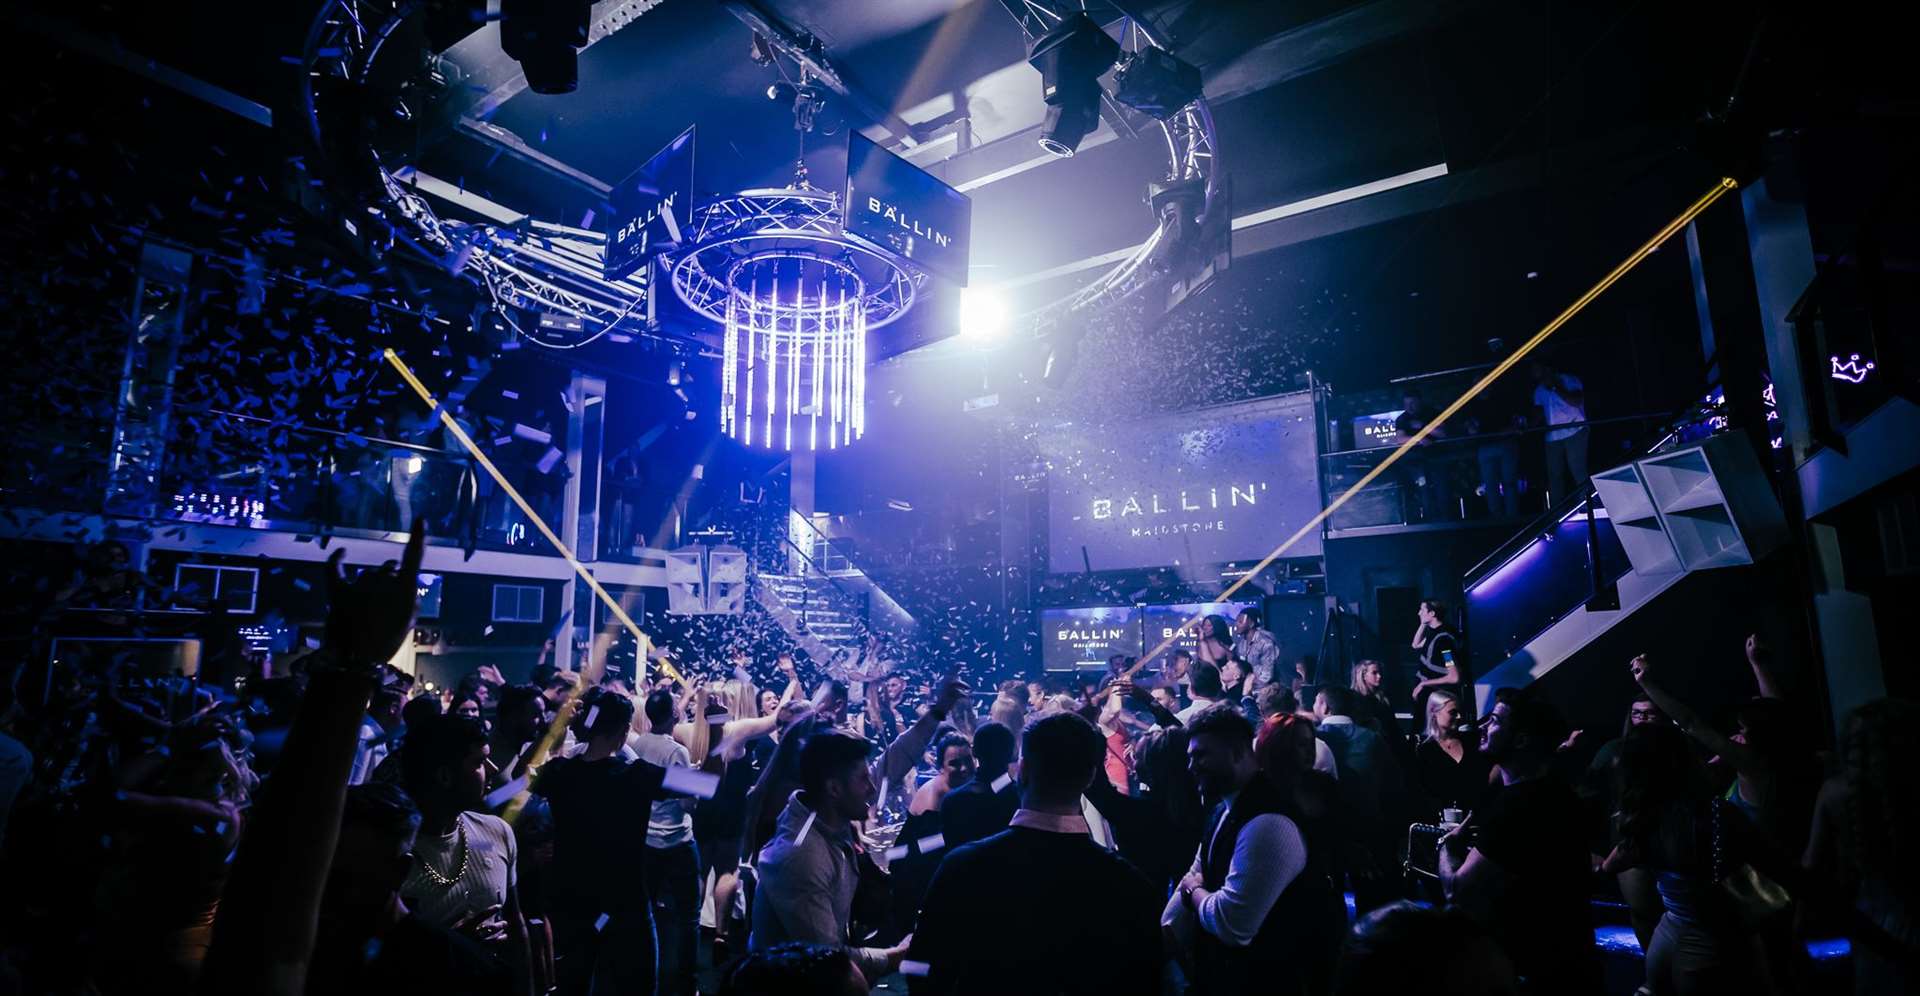 BALLIN' Maidstone is a gaming and live sports destination, food outlet, cocktail bar and nightclub all in one!